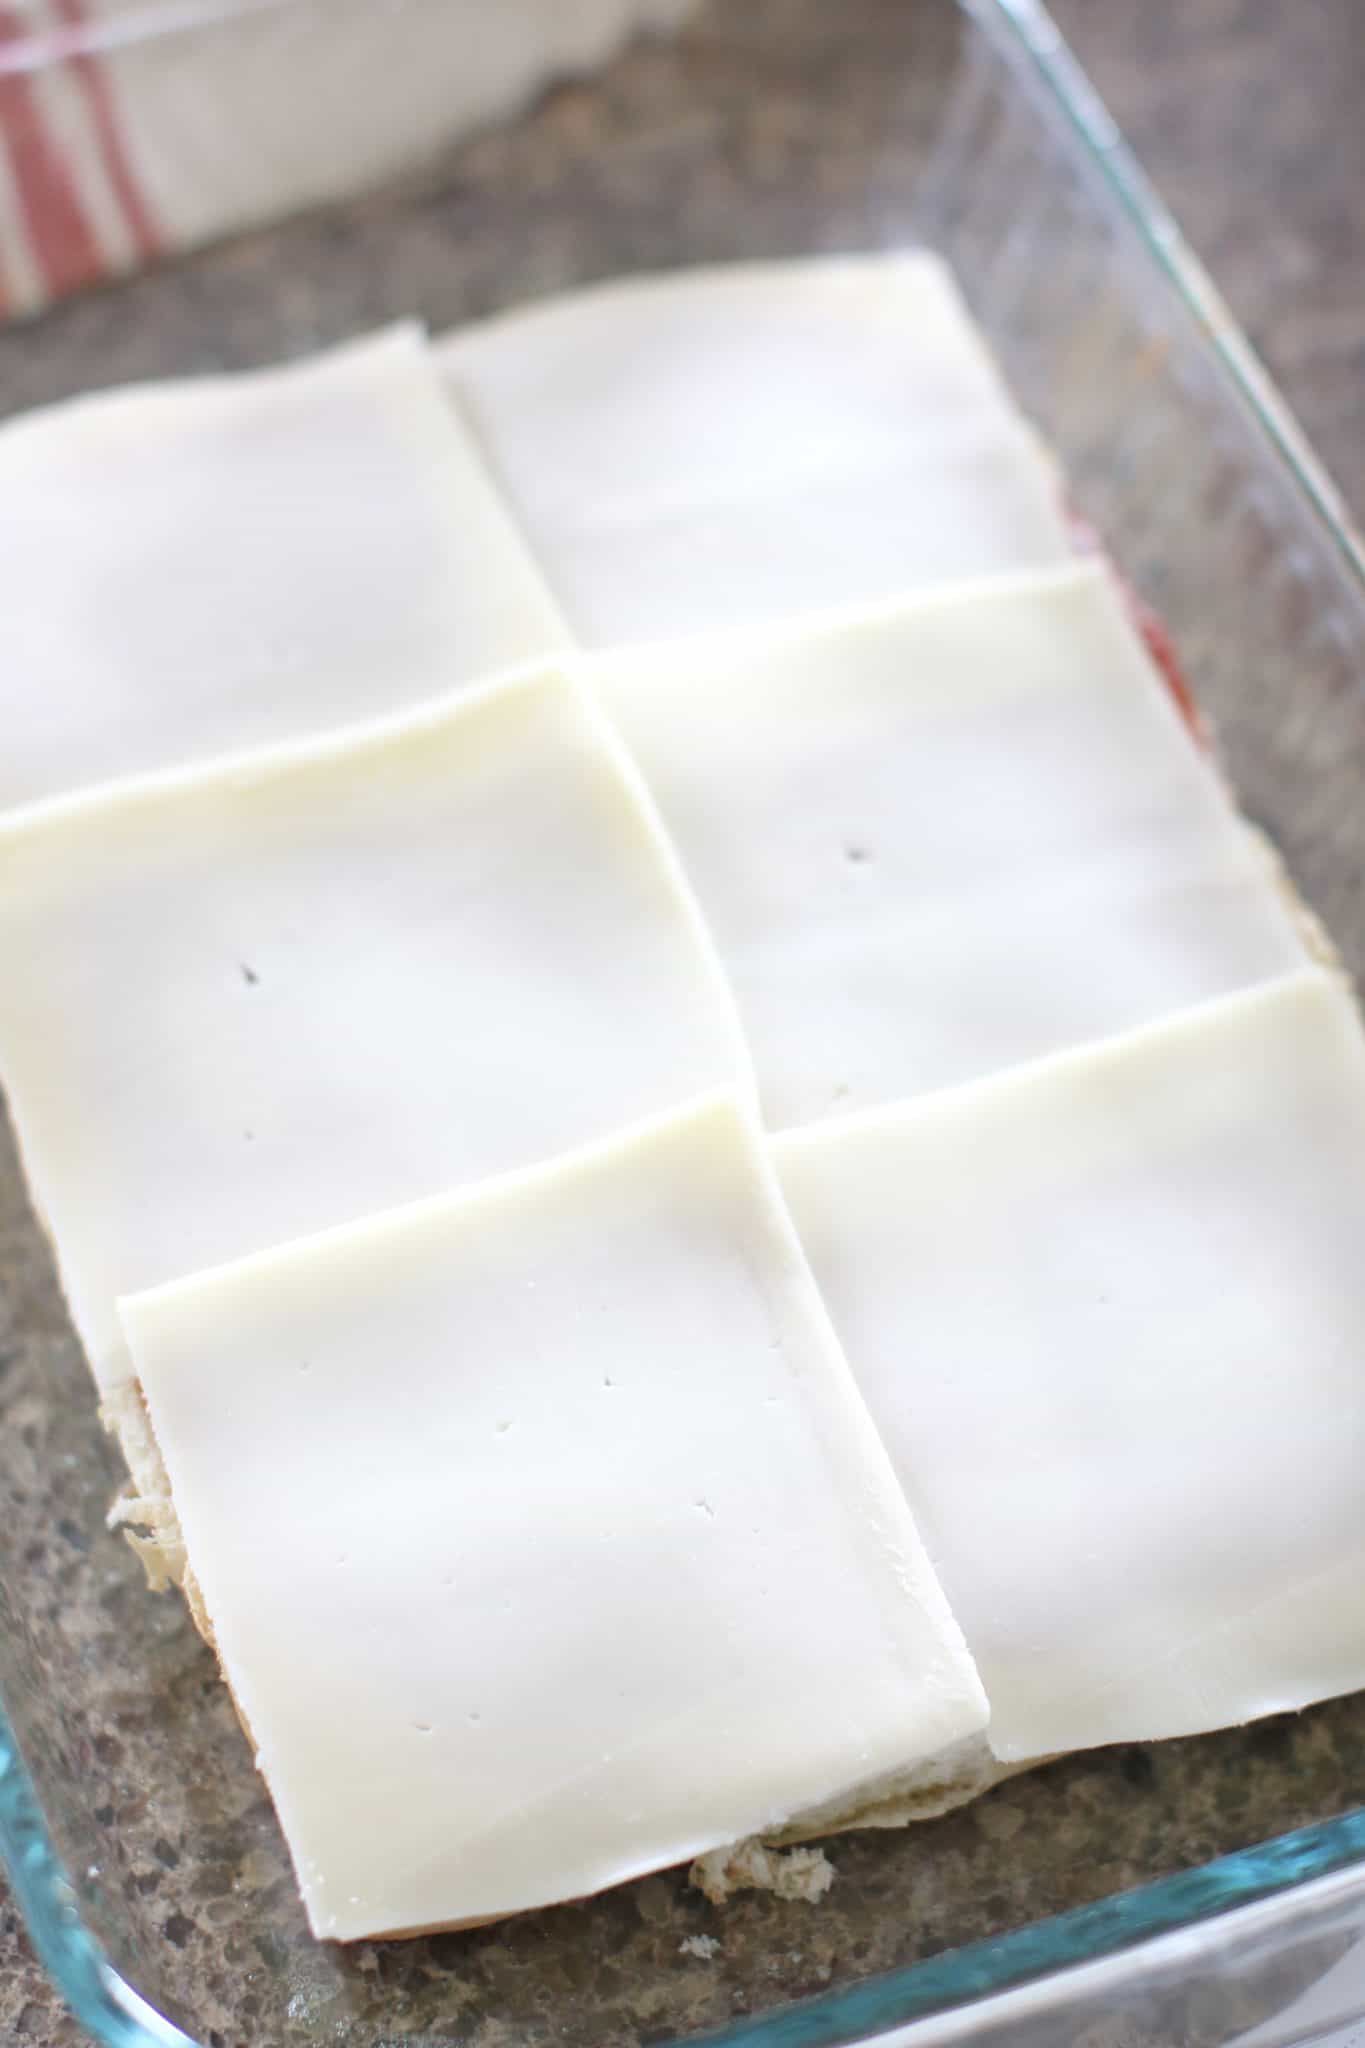 sliced mozzarella cheese placed on rolls.